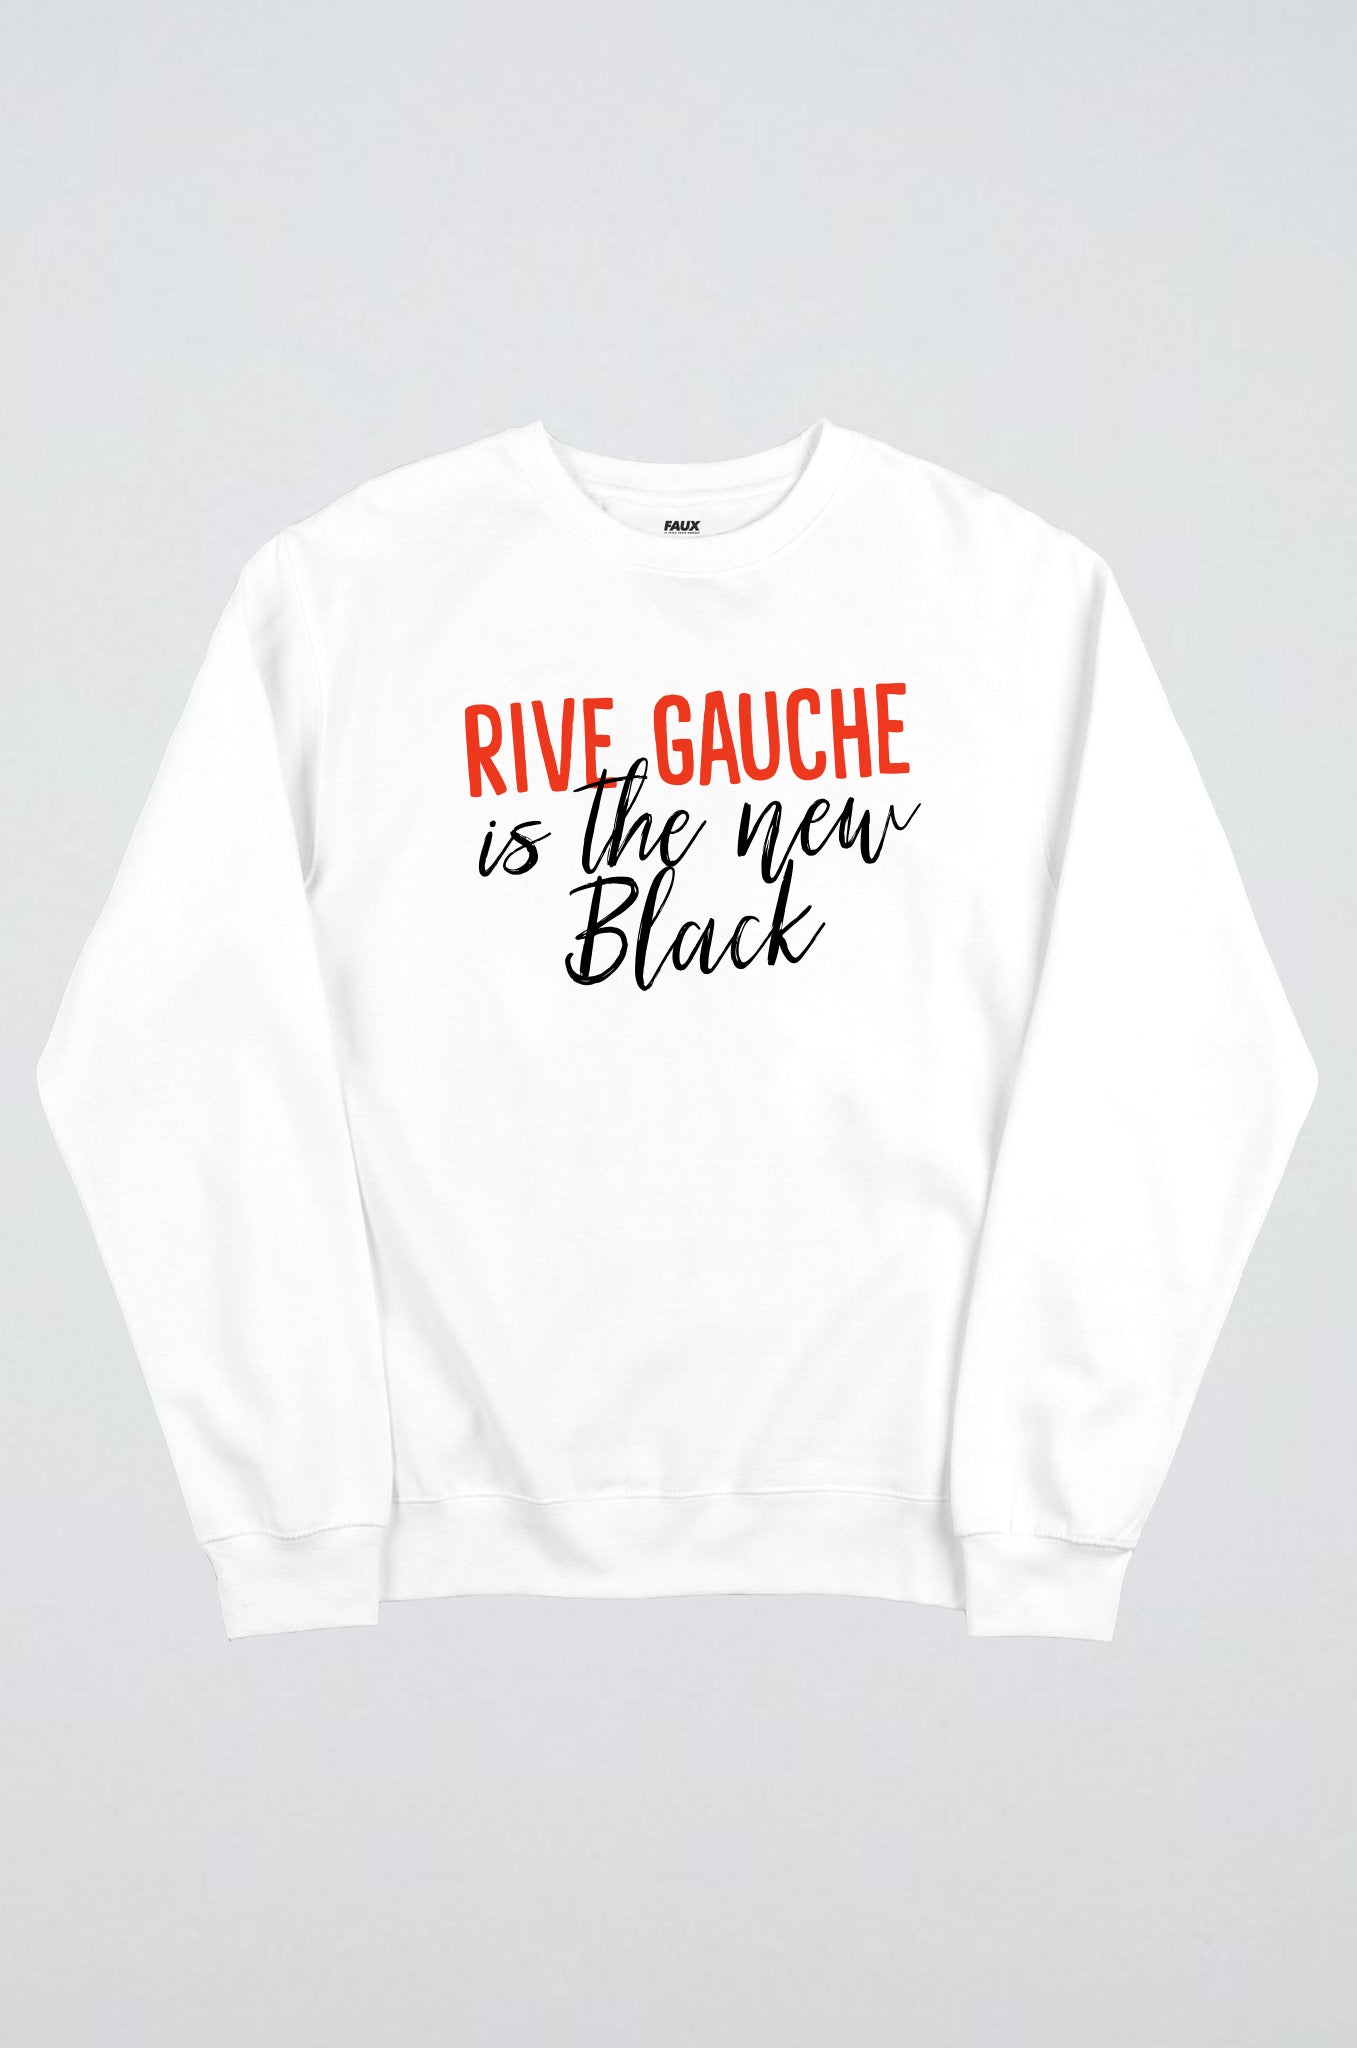 Rive Gauche is the new black